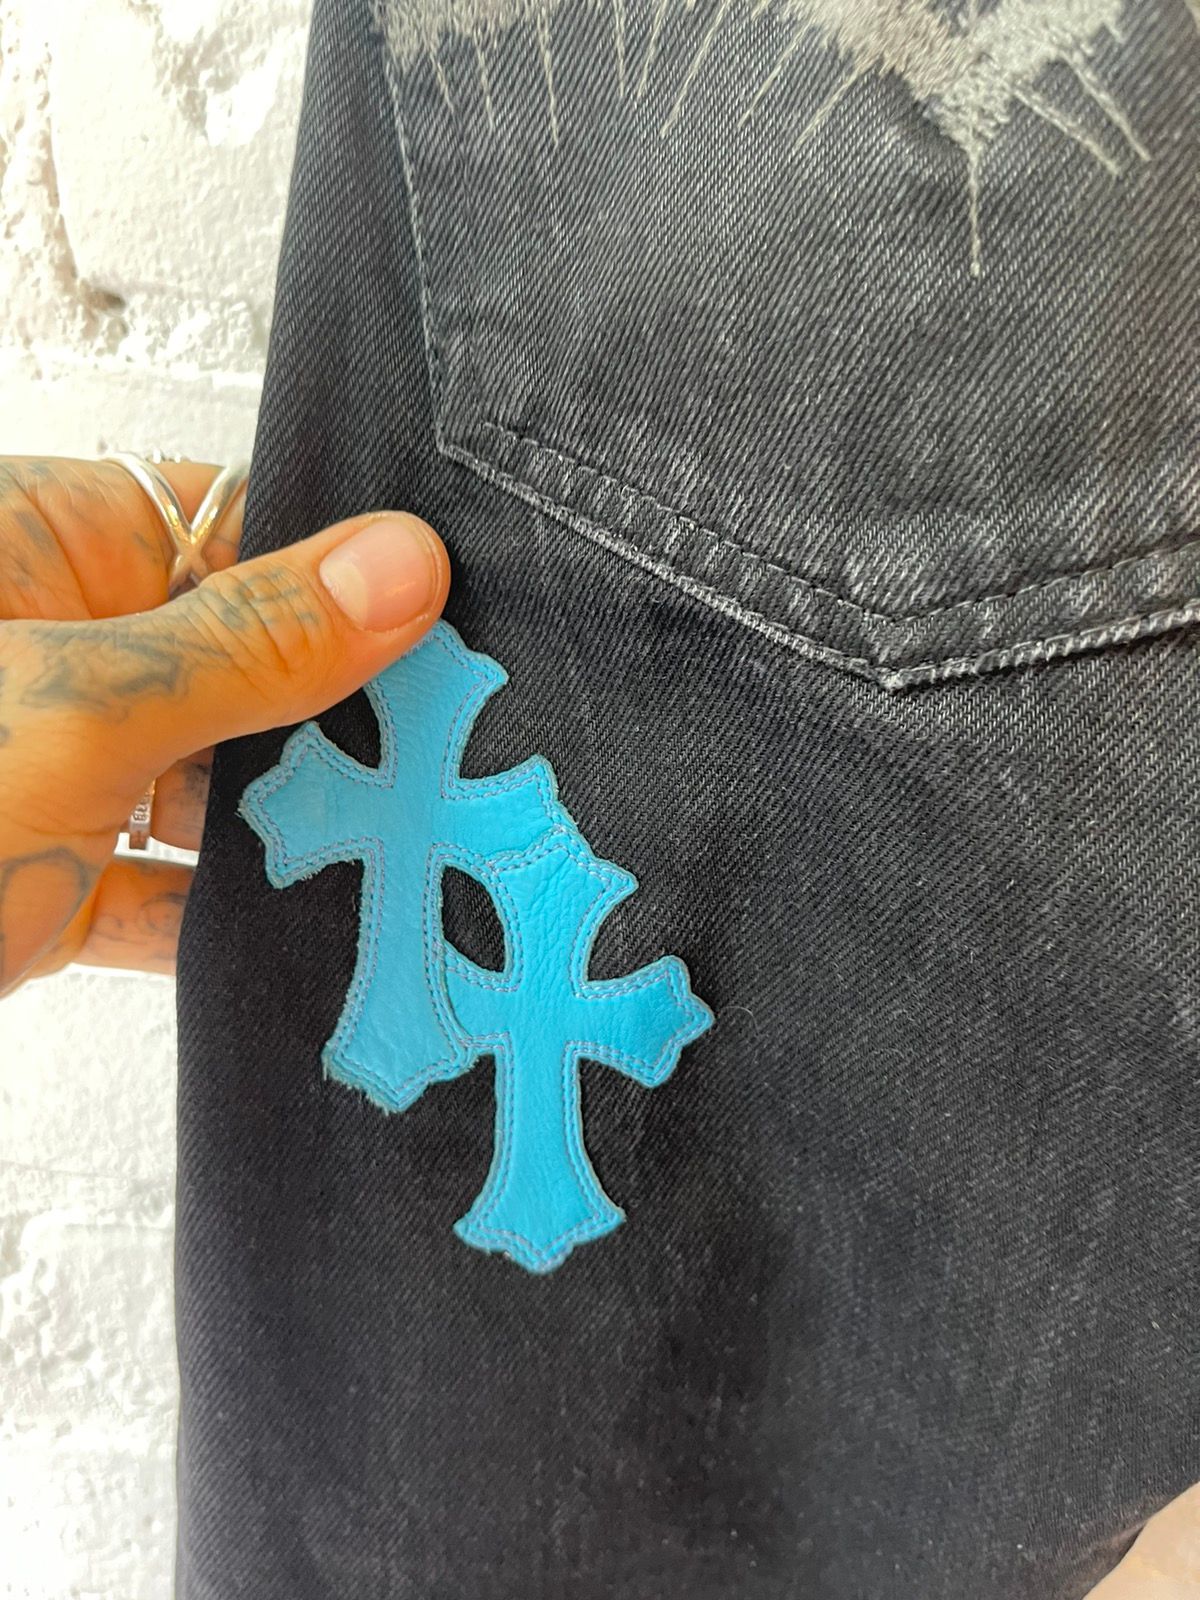 Chrome Hearts VIRGIL’S PERSONAL Cross Jeans TURQUOISE / BLACK